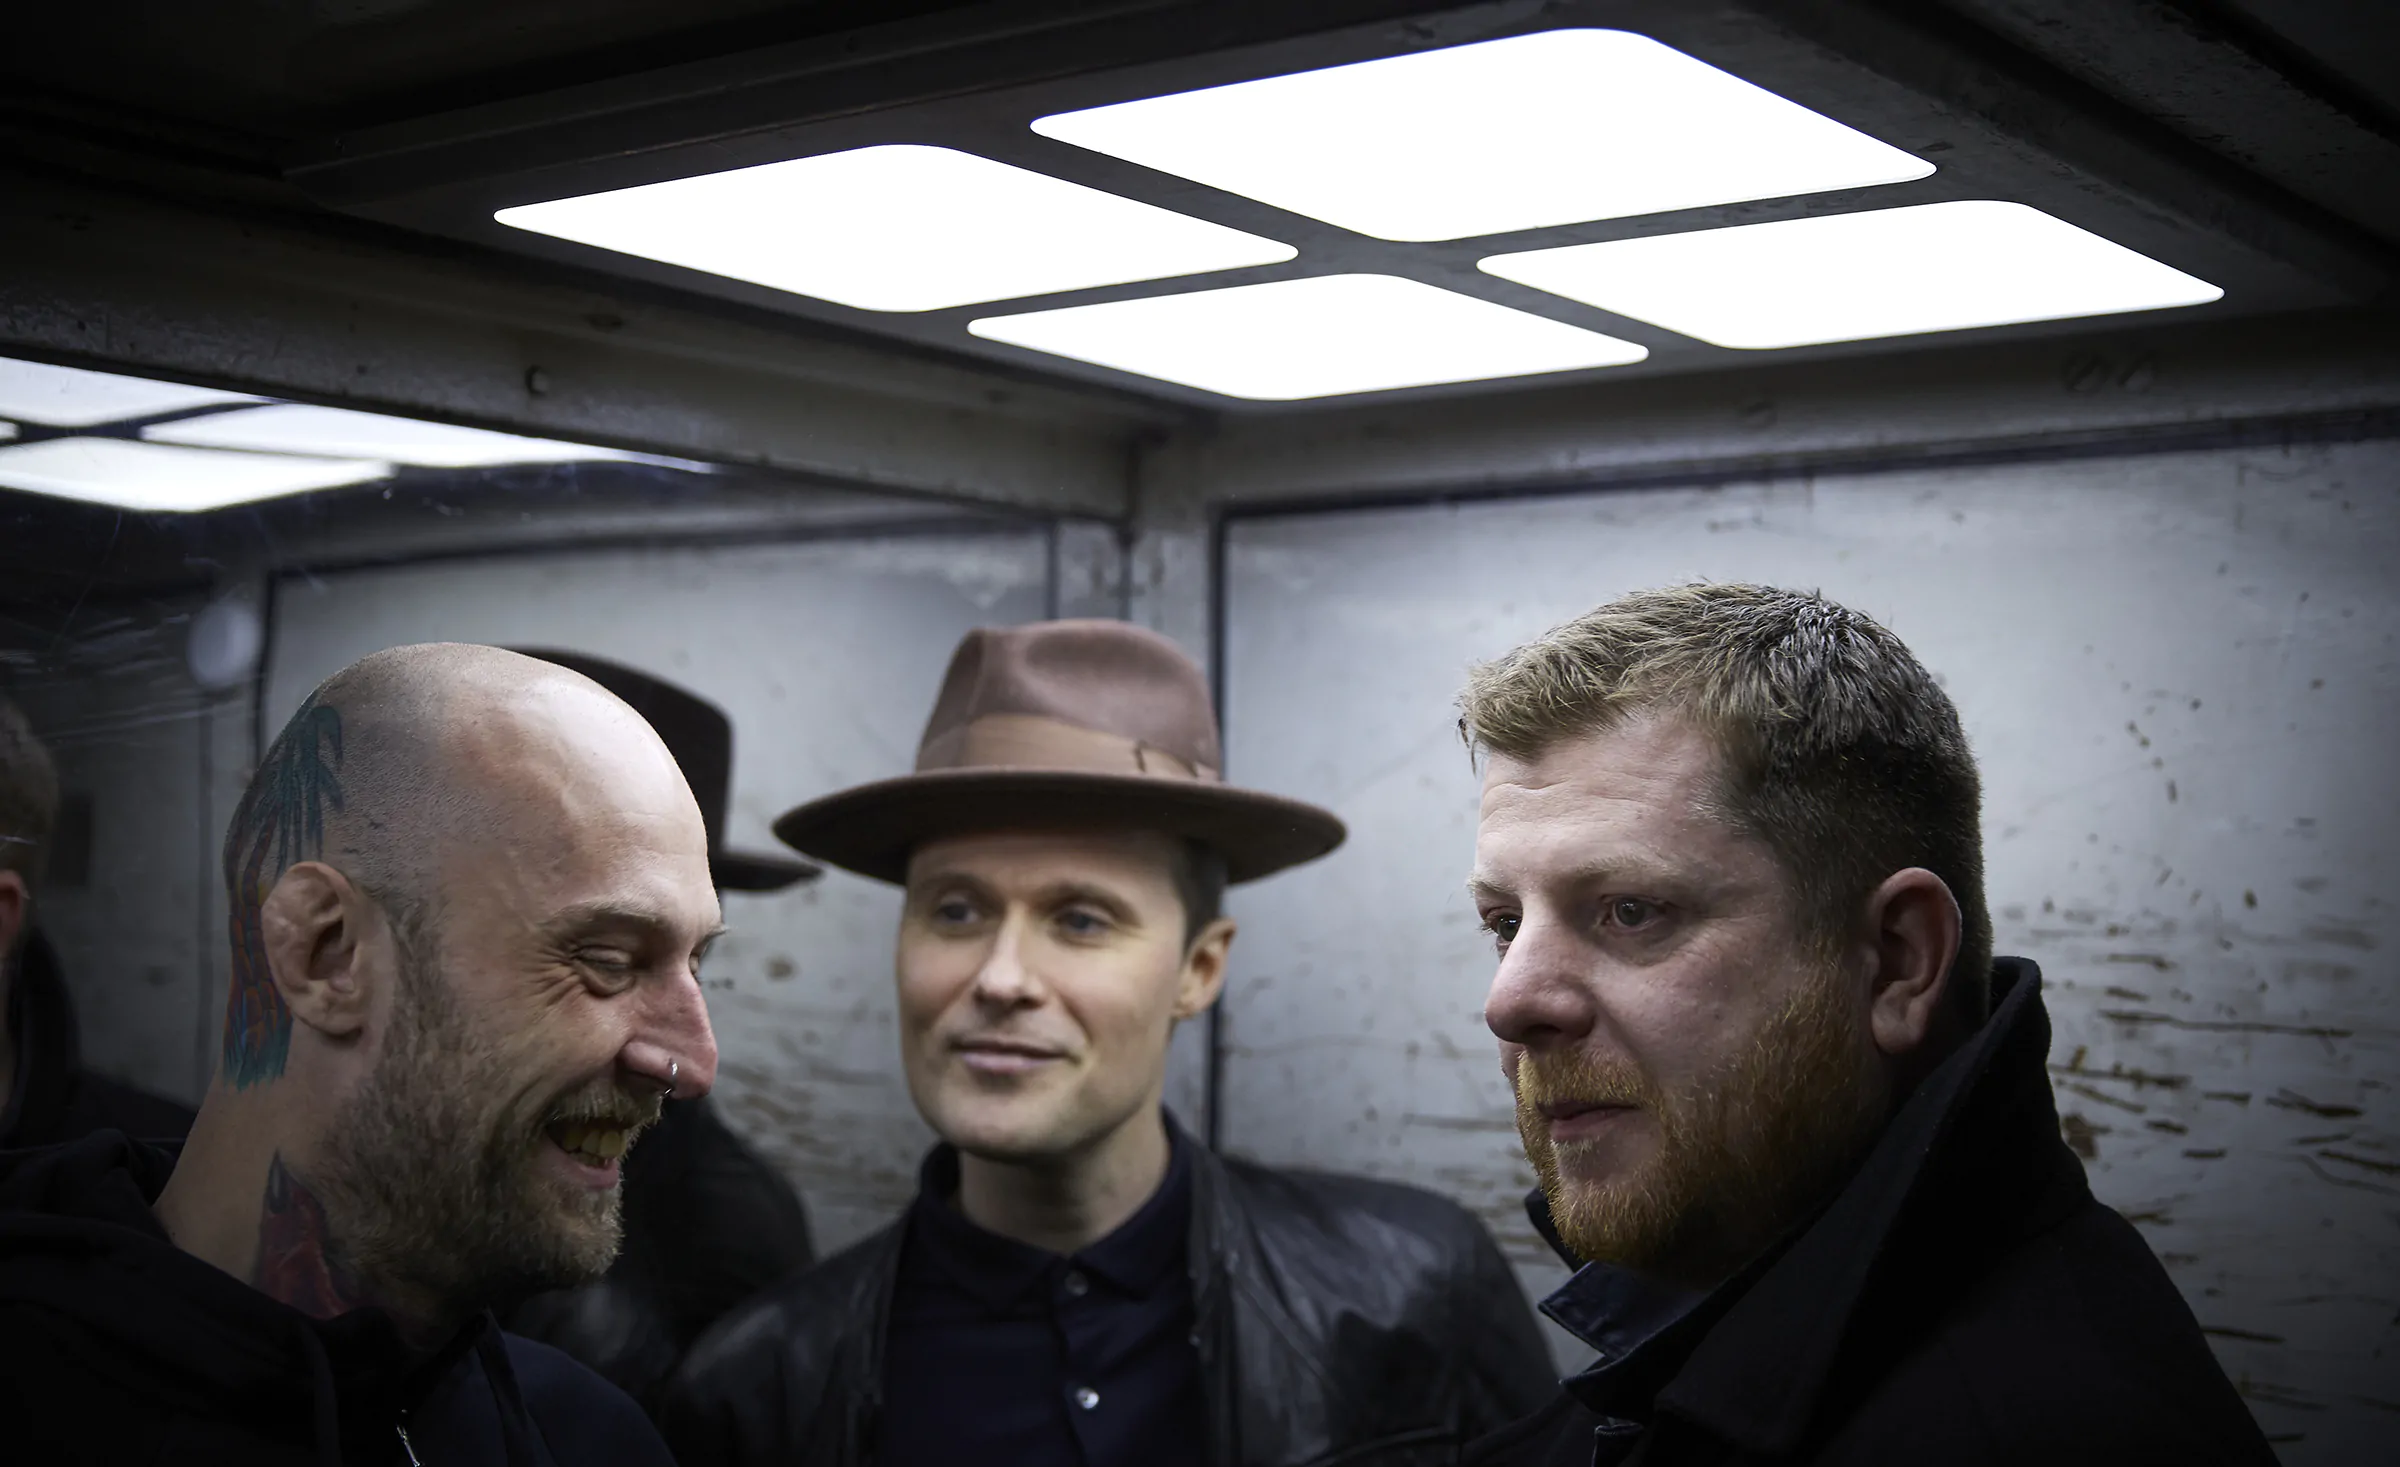 THE FRATELLIS share ‘Need a Little Love’ (Rudimental Remix) – Listen Now!